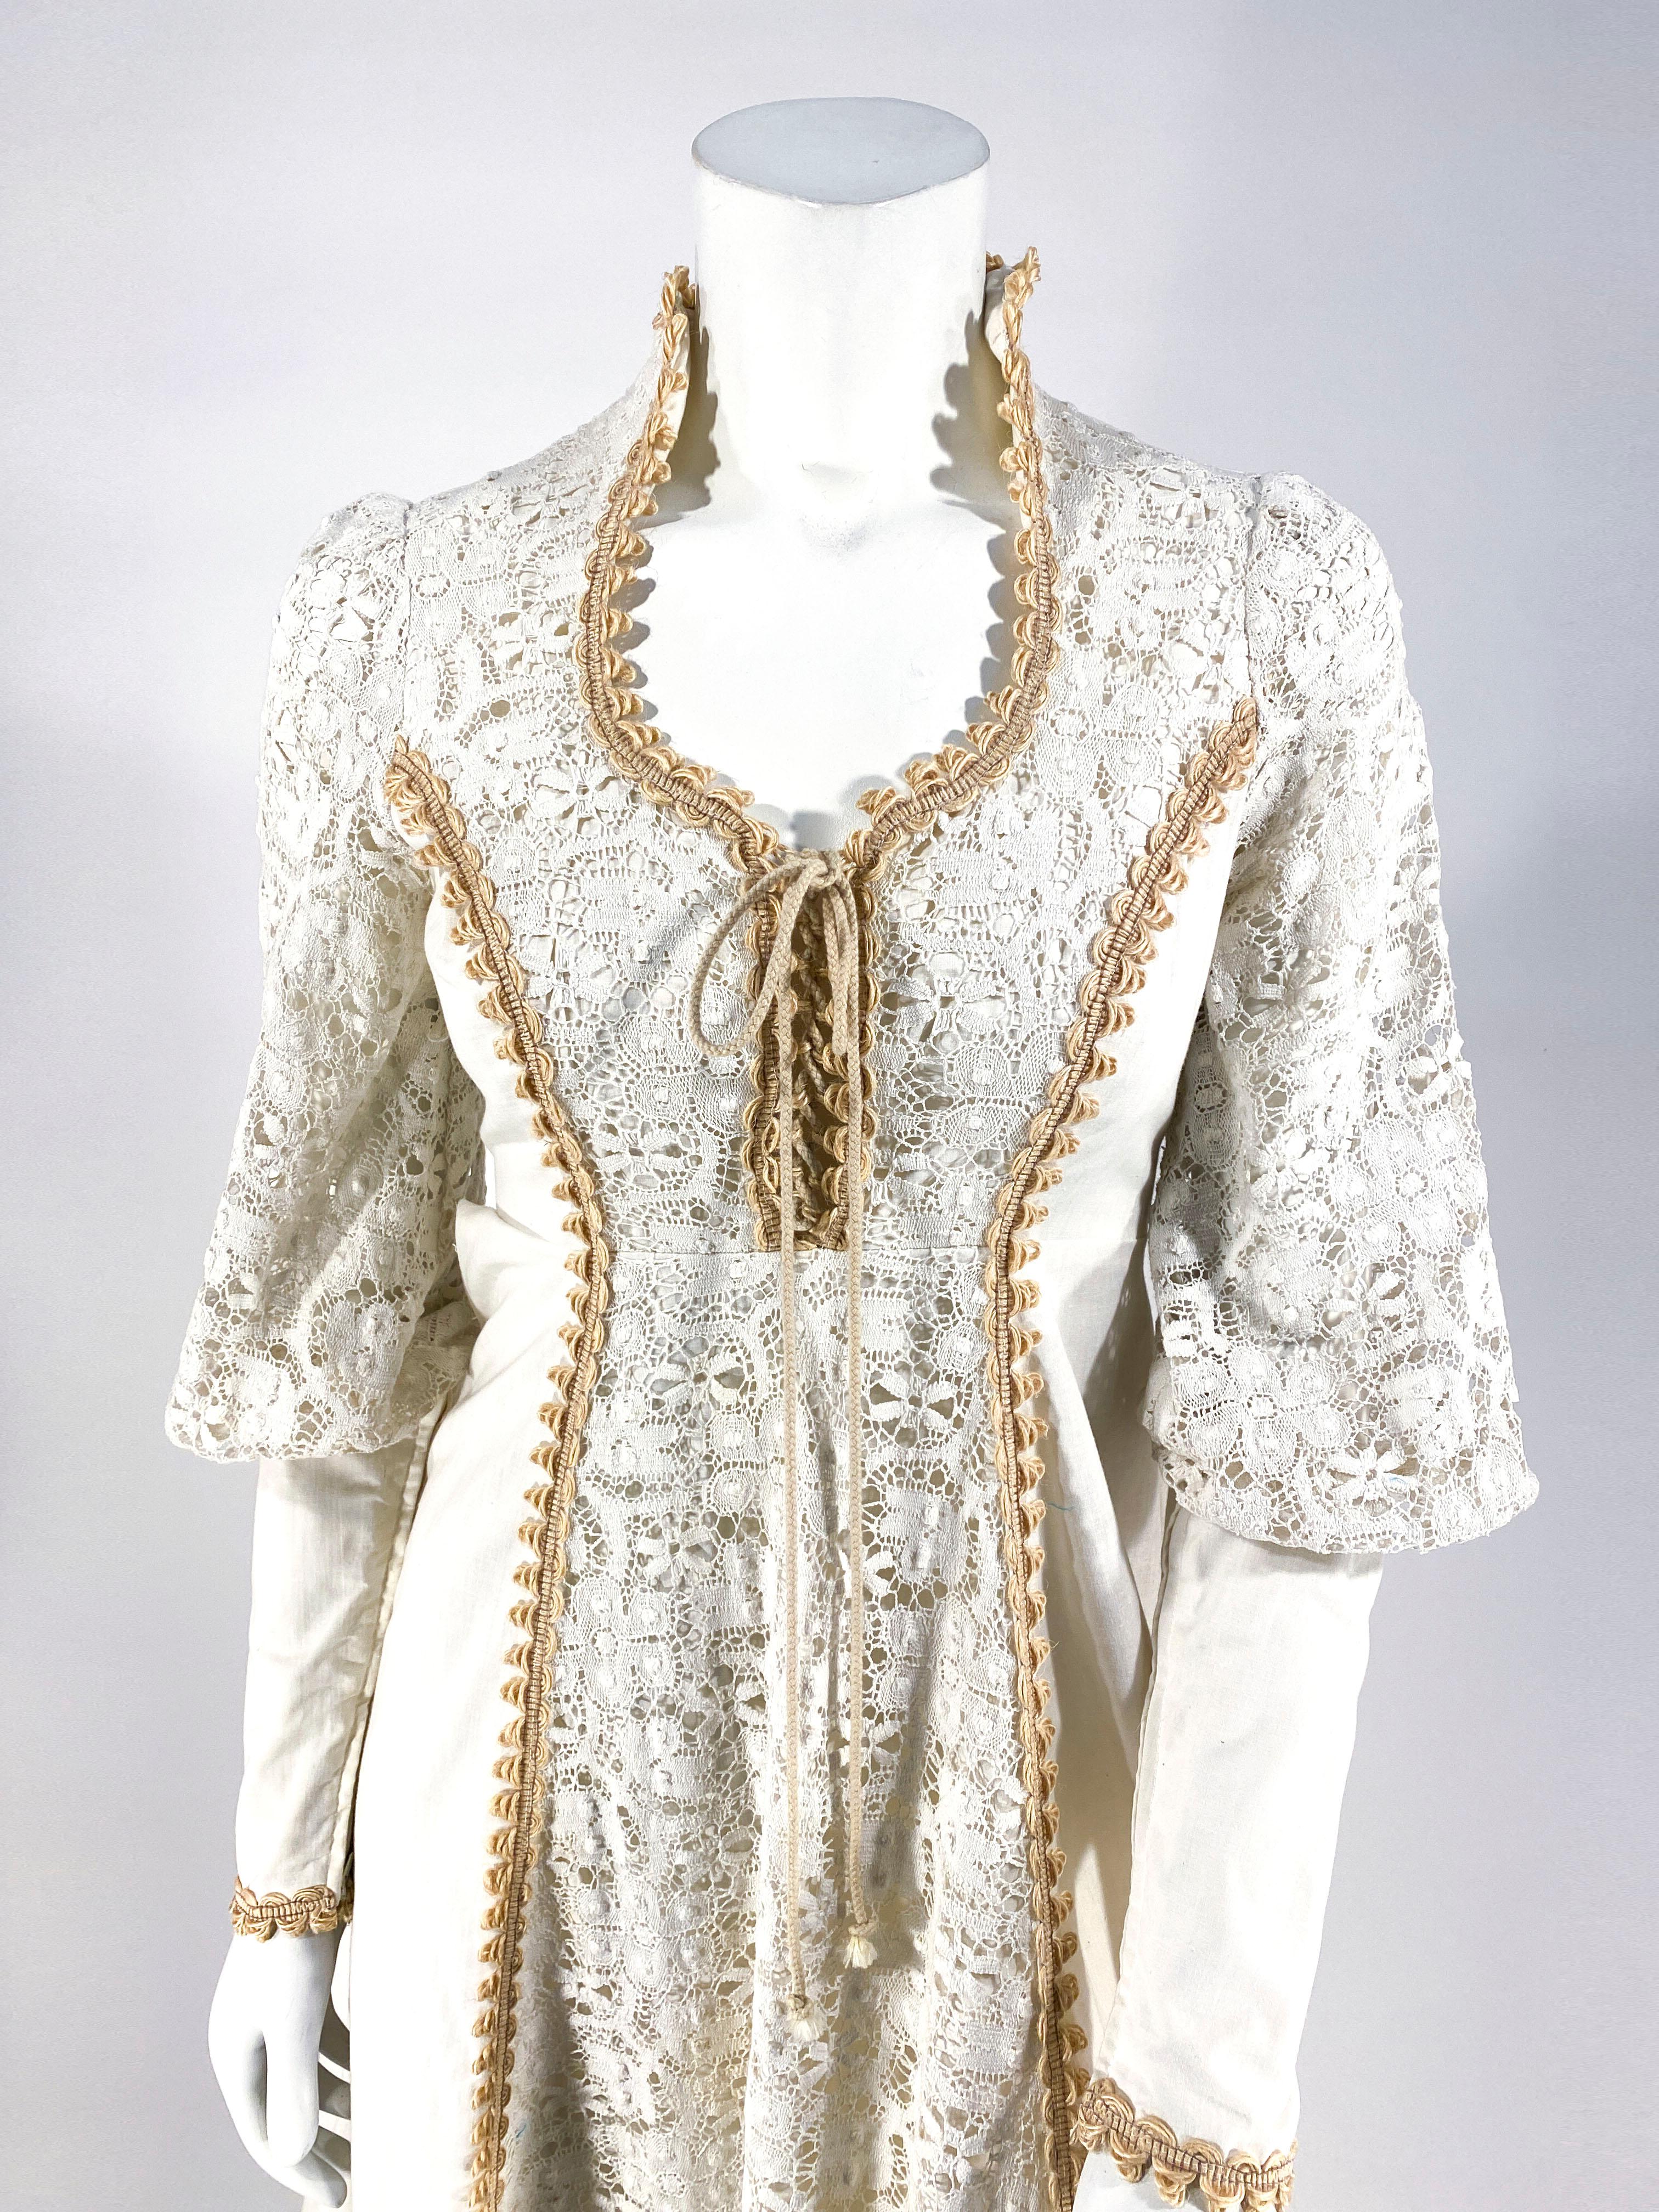 Late 1960s to early 1970s Gunne Sax cream prairie/cottage dress featuring crochet lace paneling alone the face of the dress and sleeves. The high neckline features a lace-up bust and is decorated with specialty hemp brick-a-brac trim. The bishop